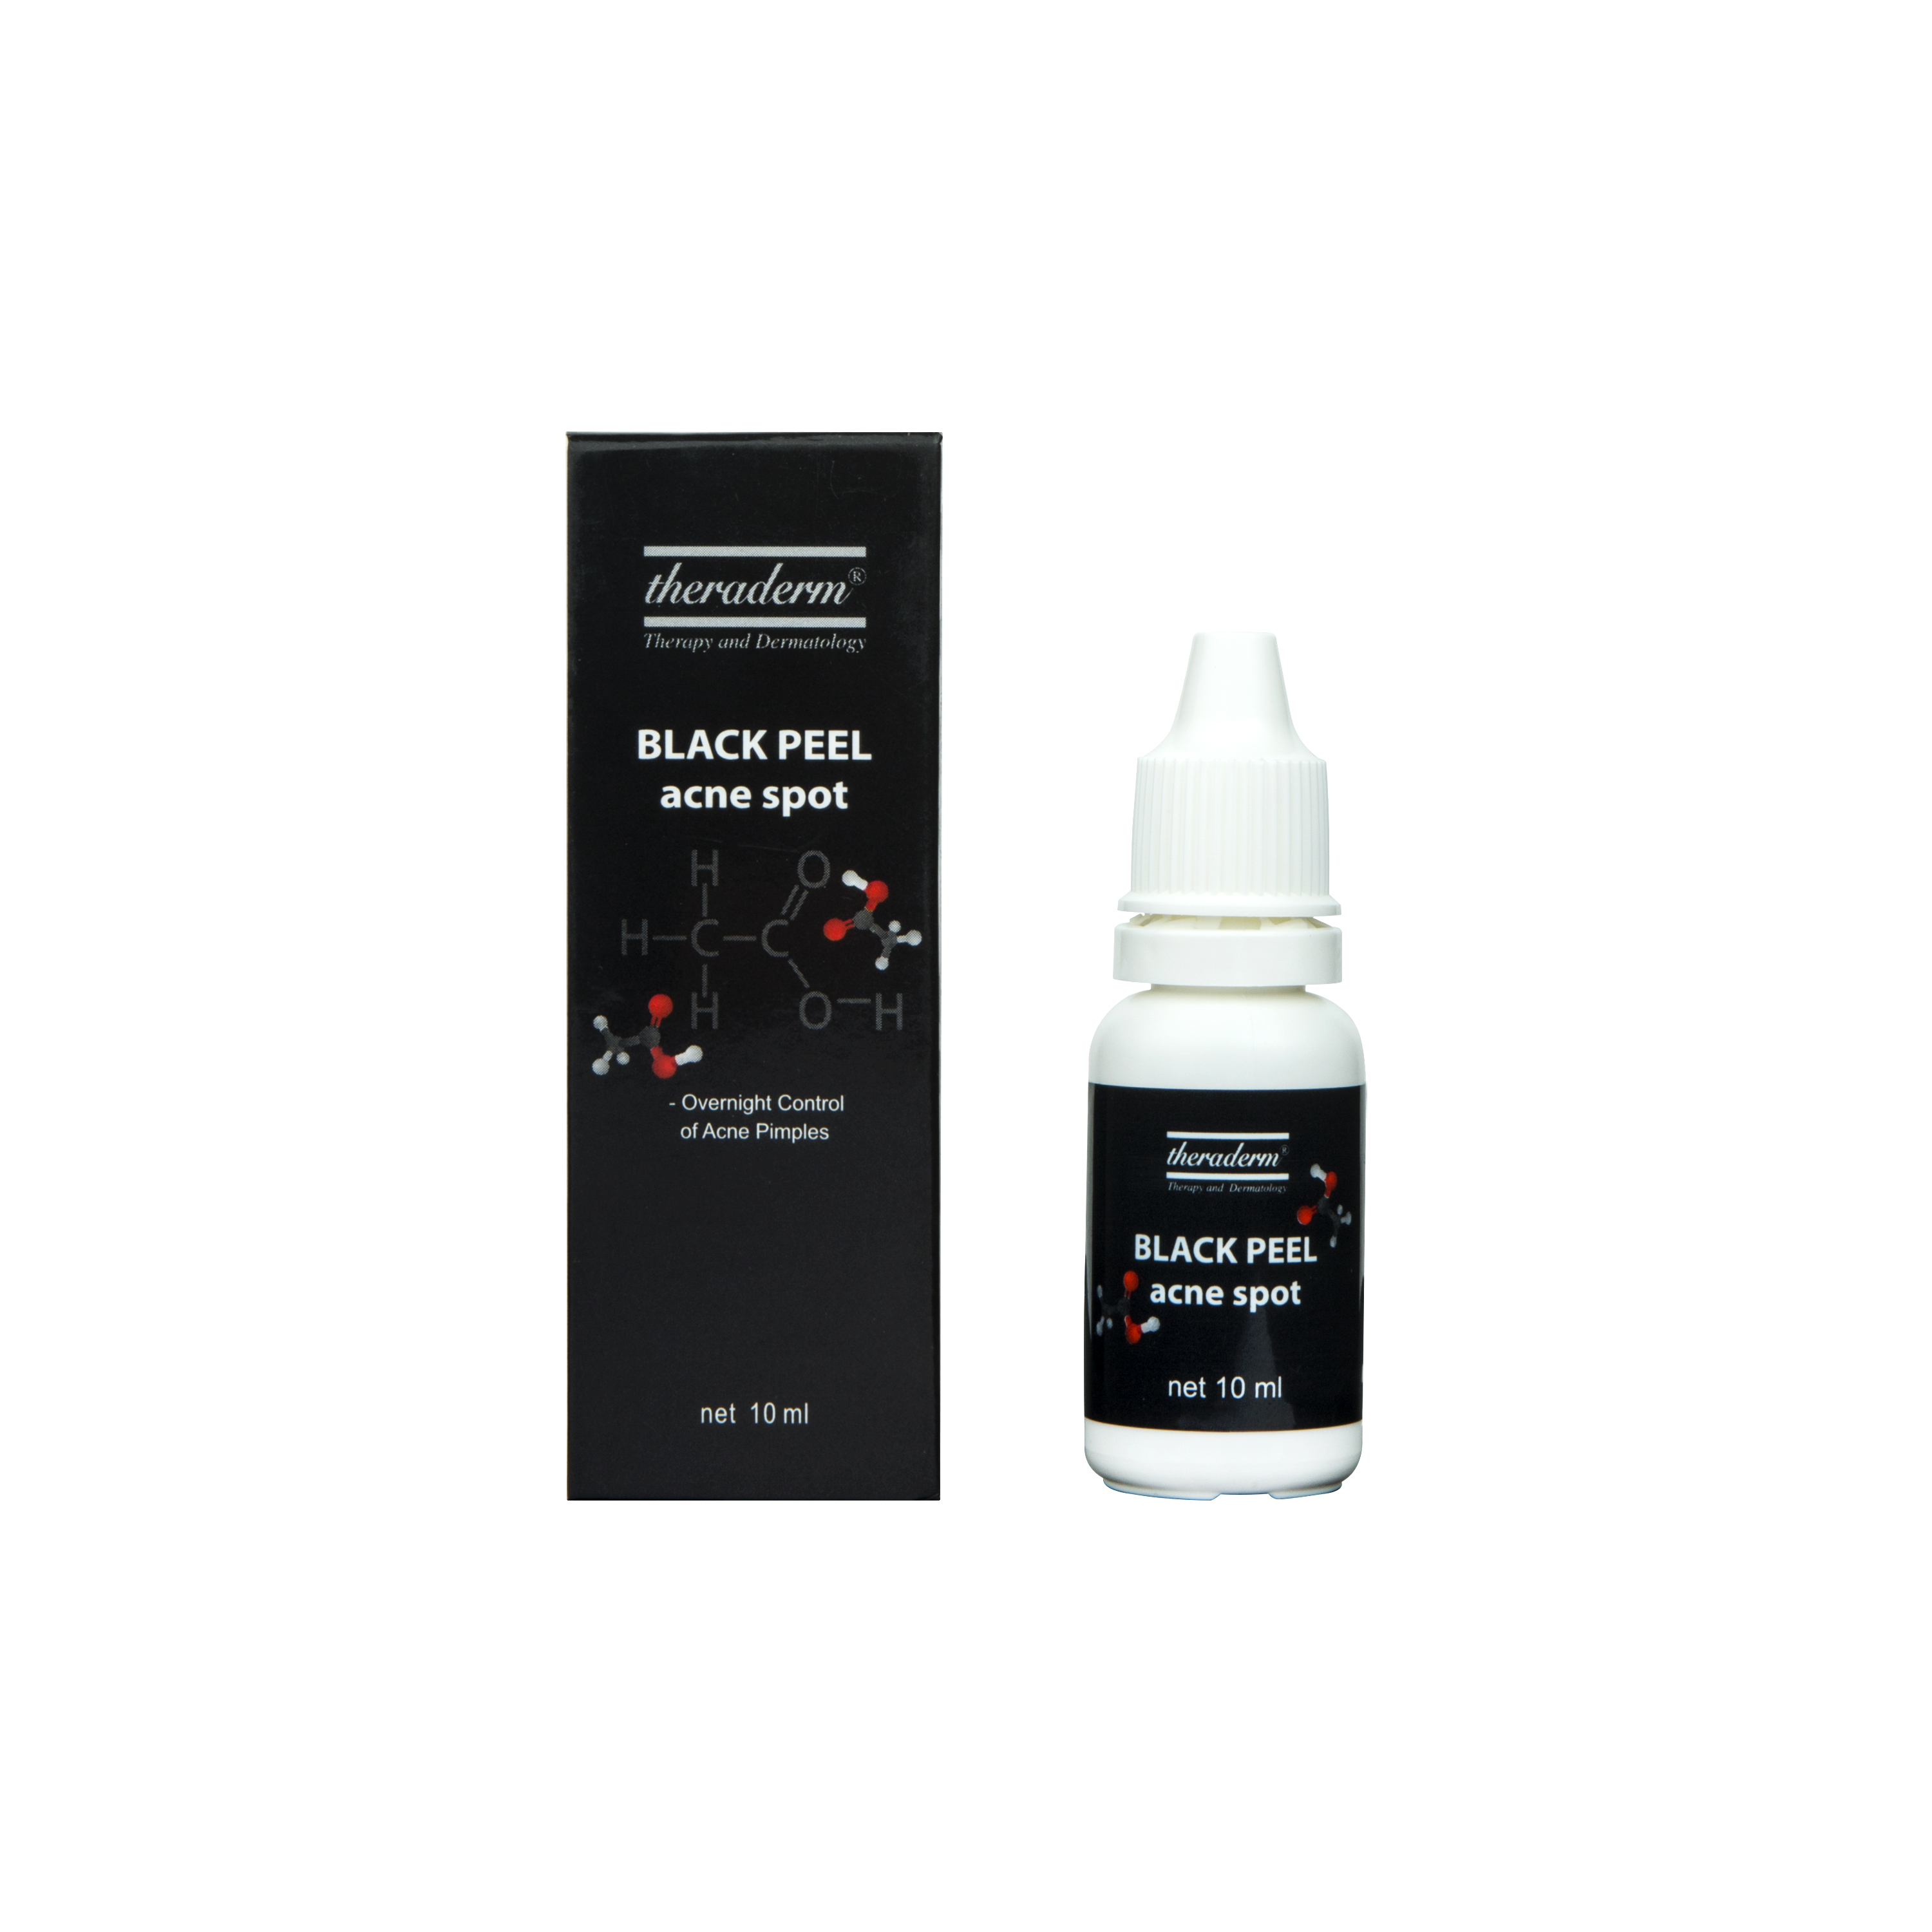 Buy Theraderm Black Peel Acne Spot (10ml) Online @ ₹2350 from ShopClues